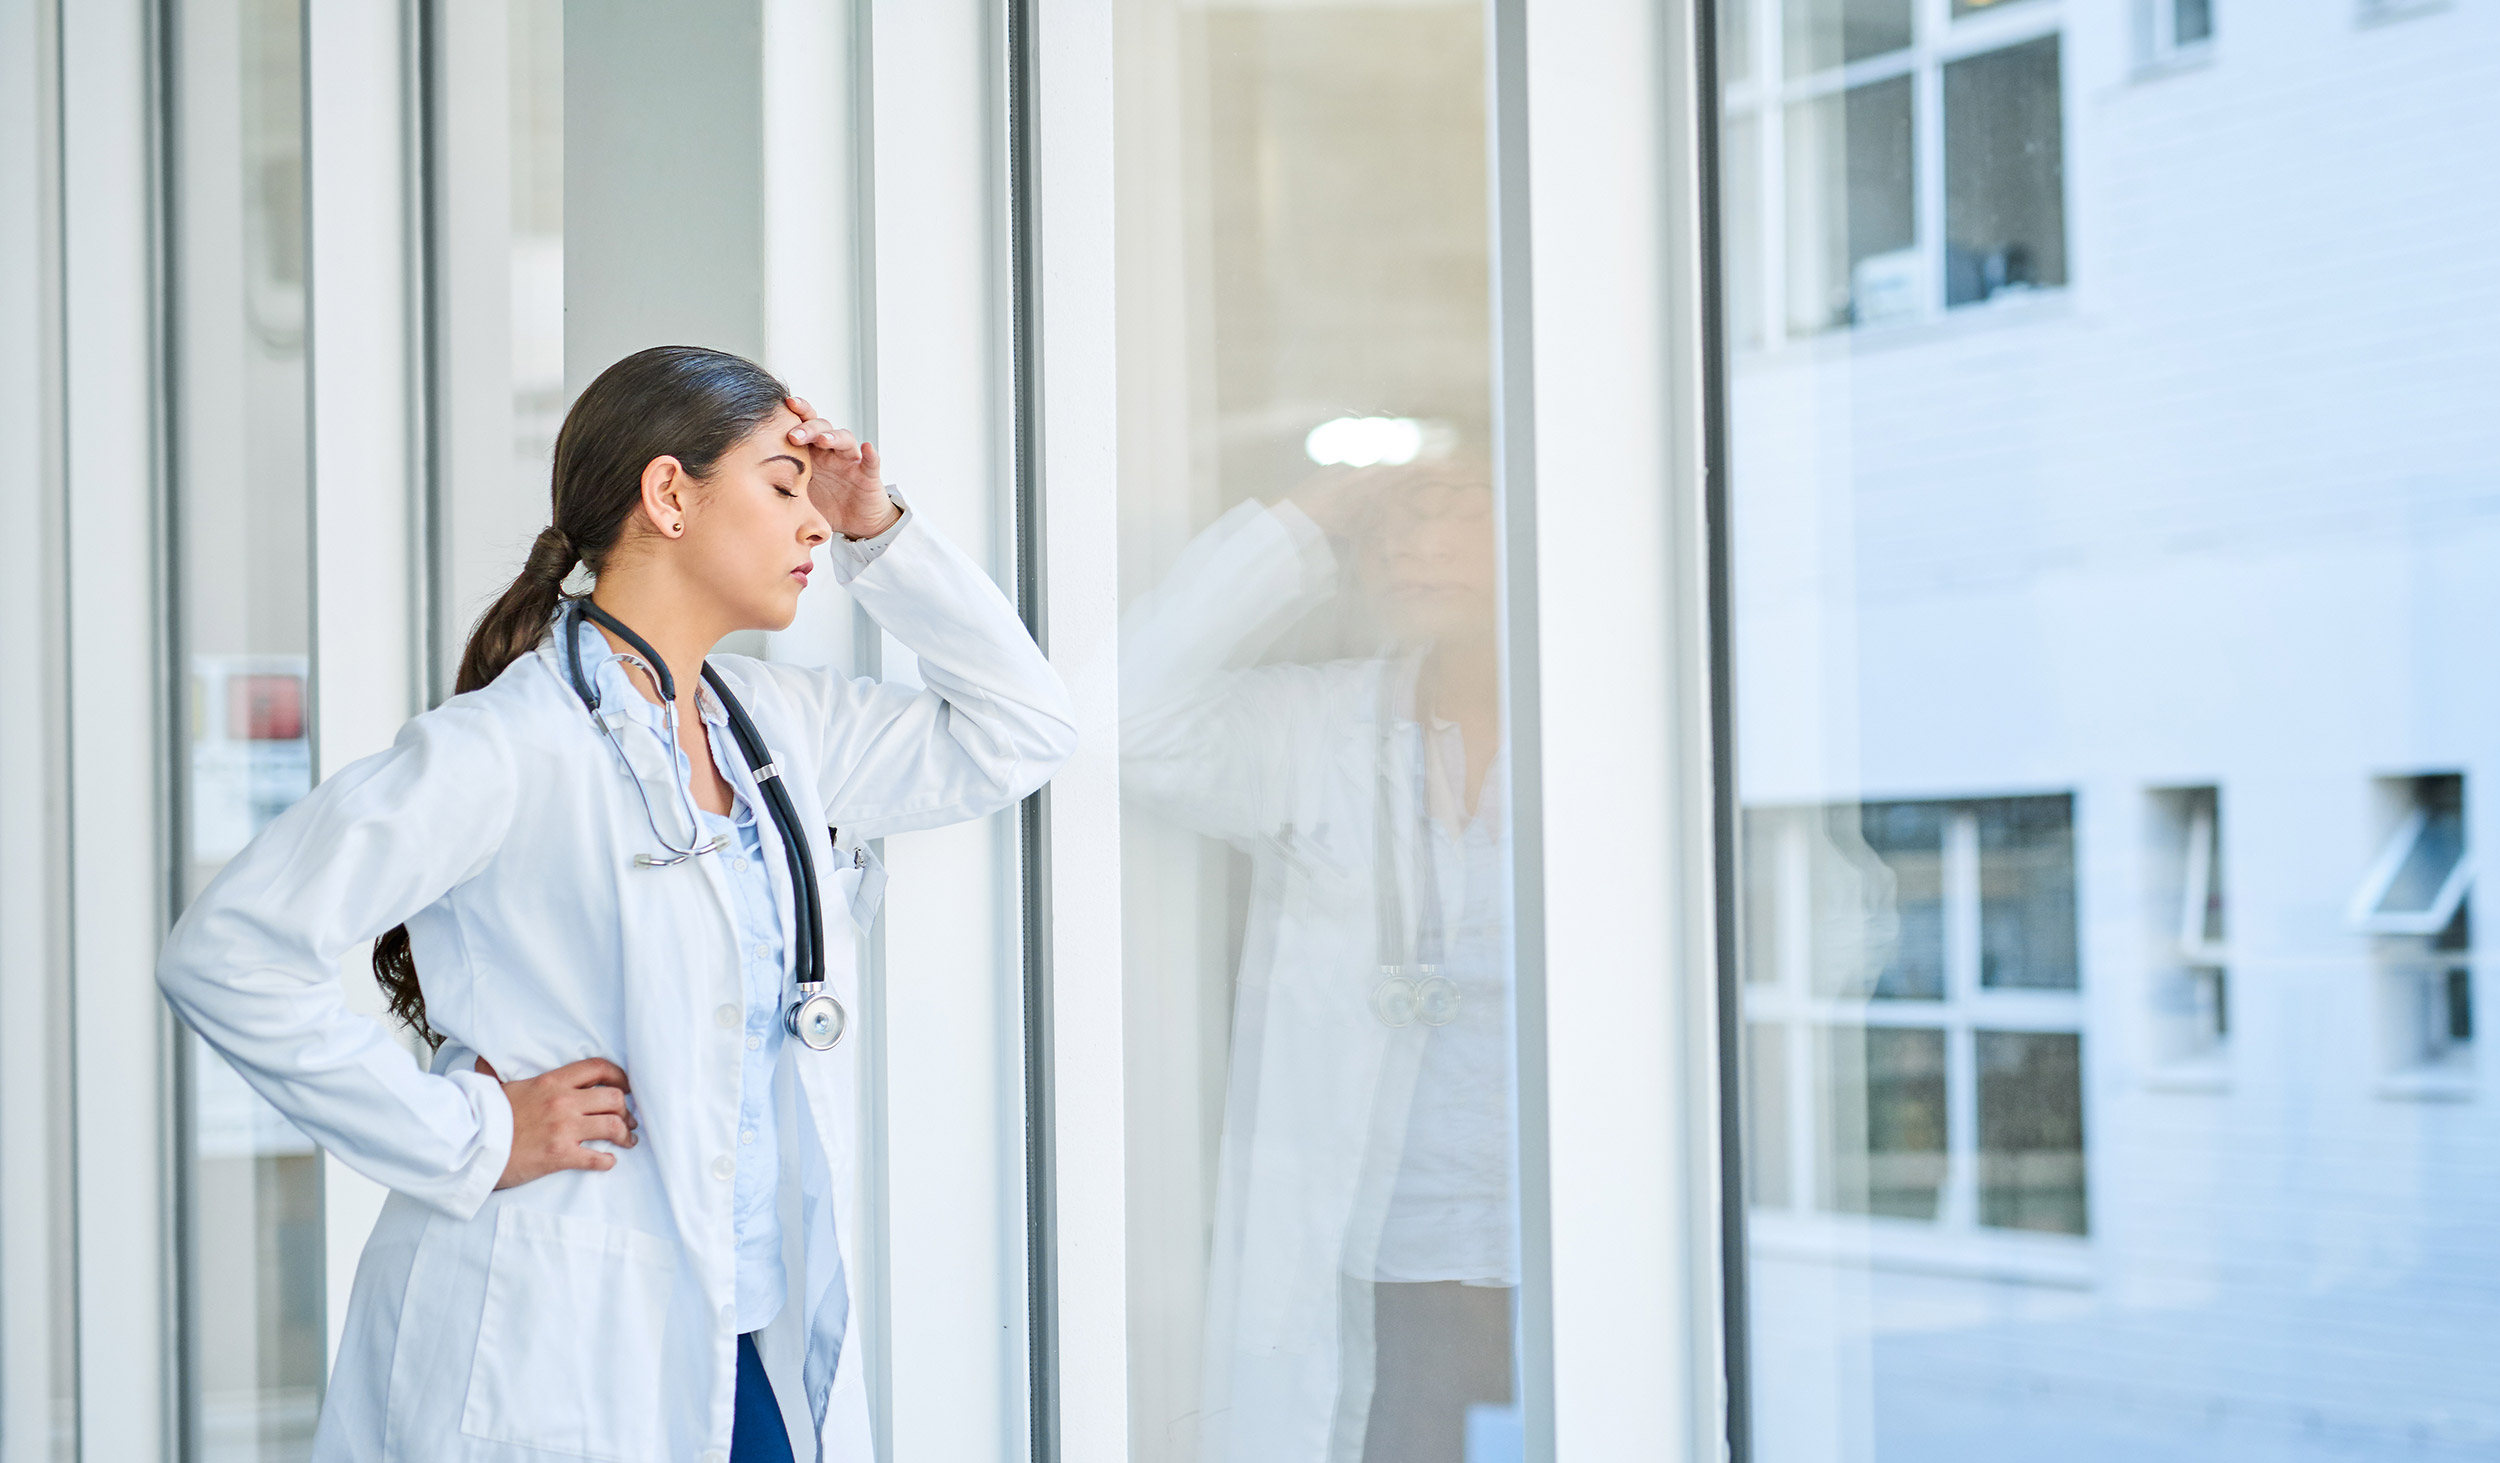 A white female physician whose eyes are closed with her hand over her forehead  and appears to be stressed facing a large window. 